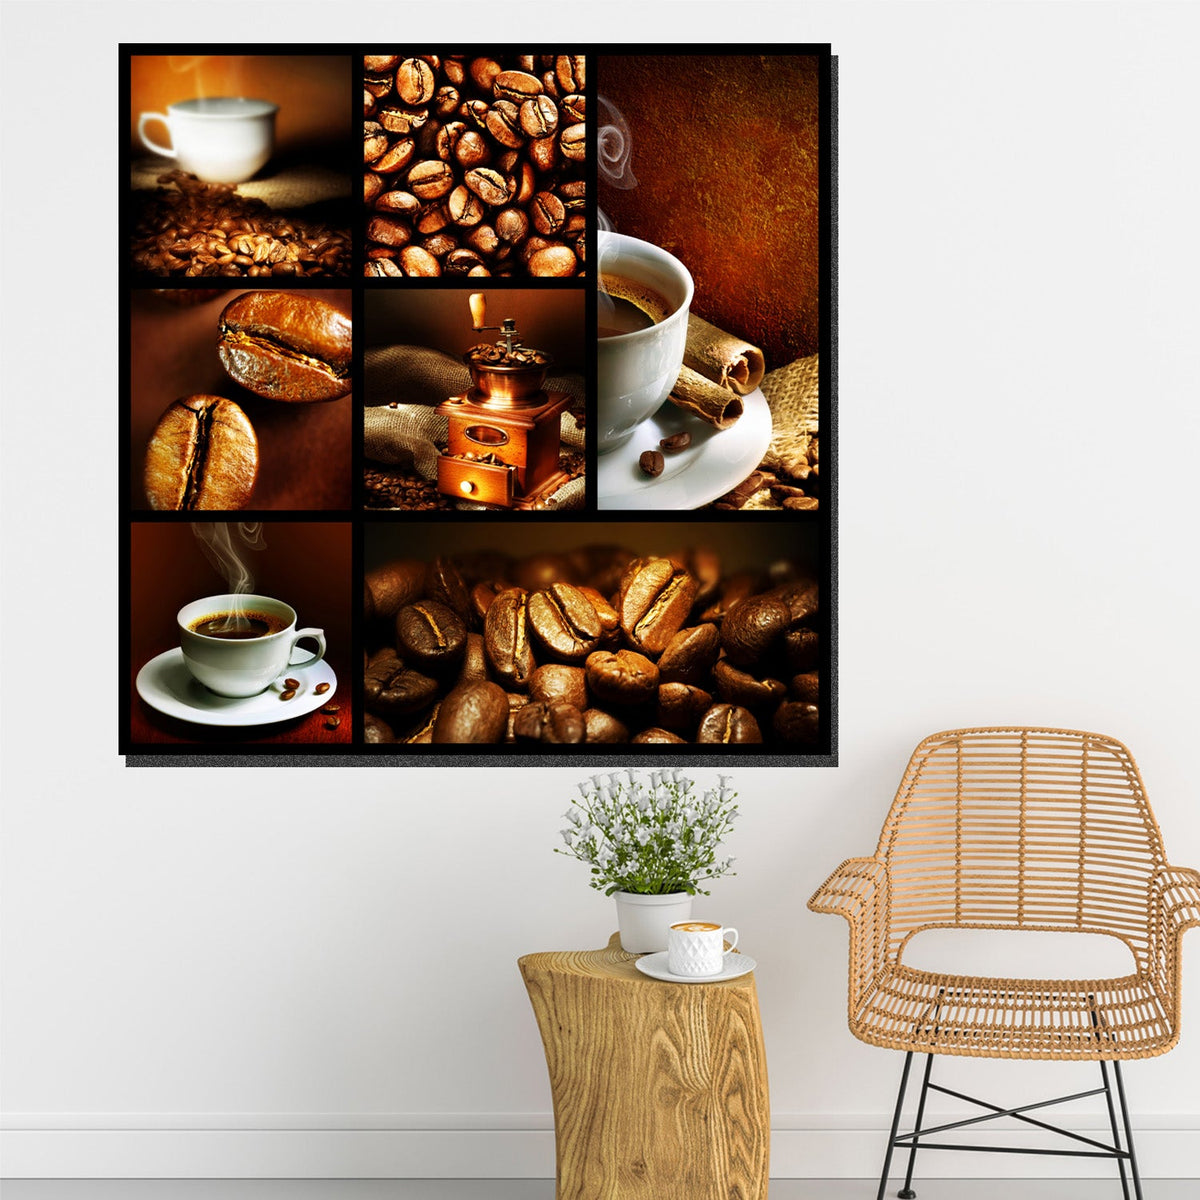 https://cdn.shopify.com/s/files/1/0387/9986/8044/products/CoffeeCollageCanvasArtprintStretched-1.jpg